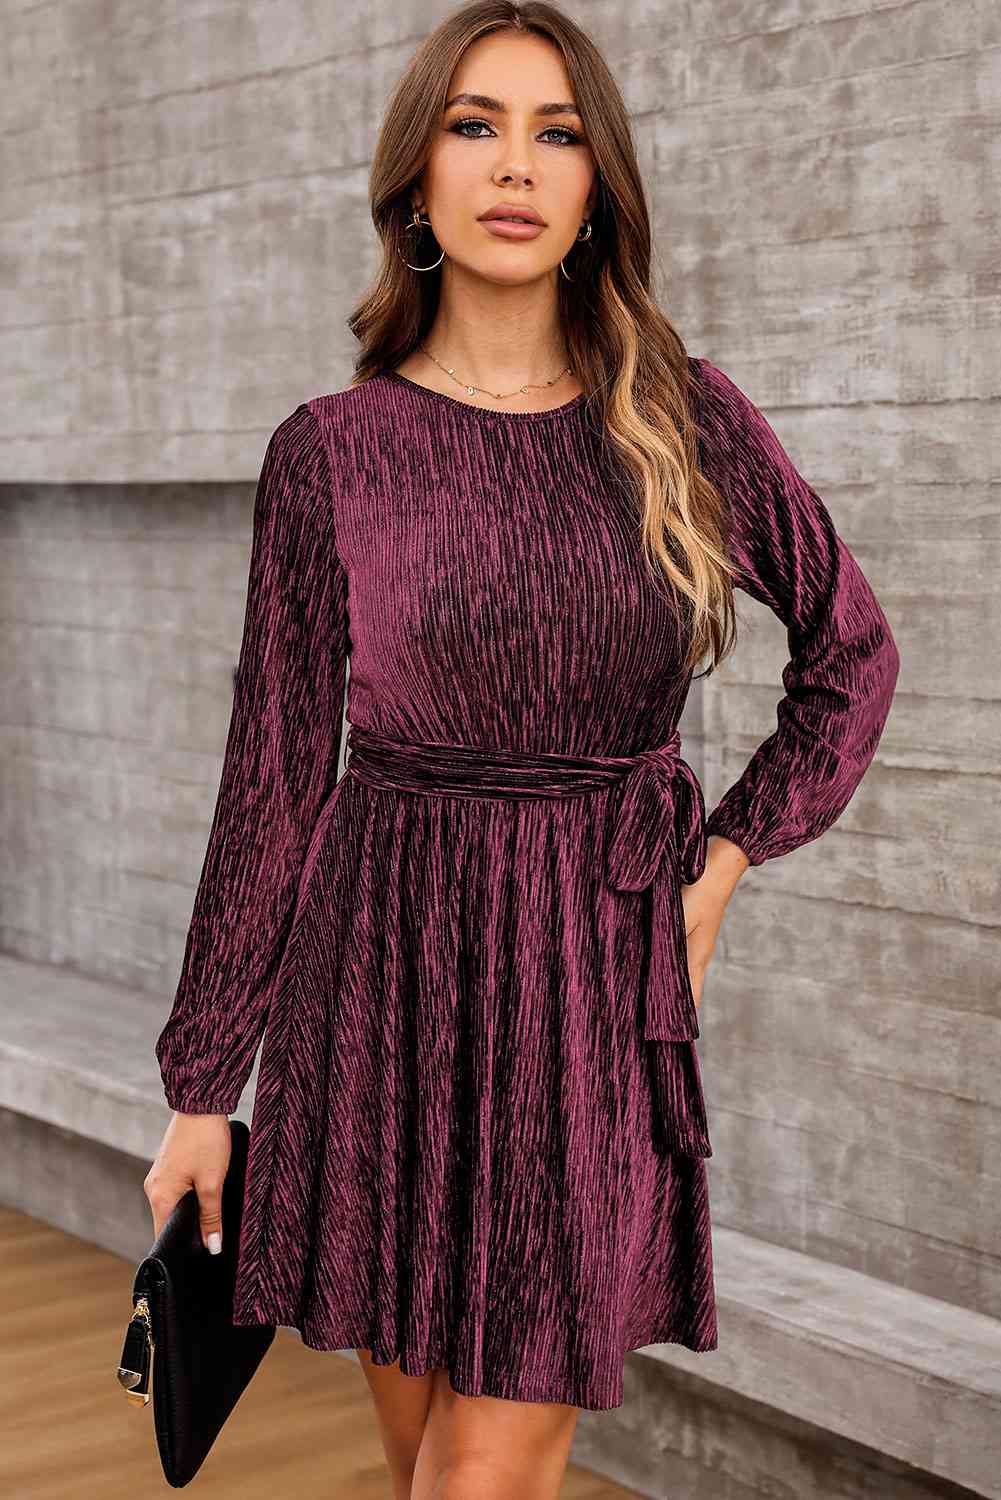 Round Neck Tie Front Long Sleeve Dress - Wine / S - All Dresses - Dresses - 5 - 2024